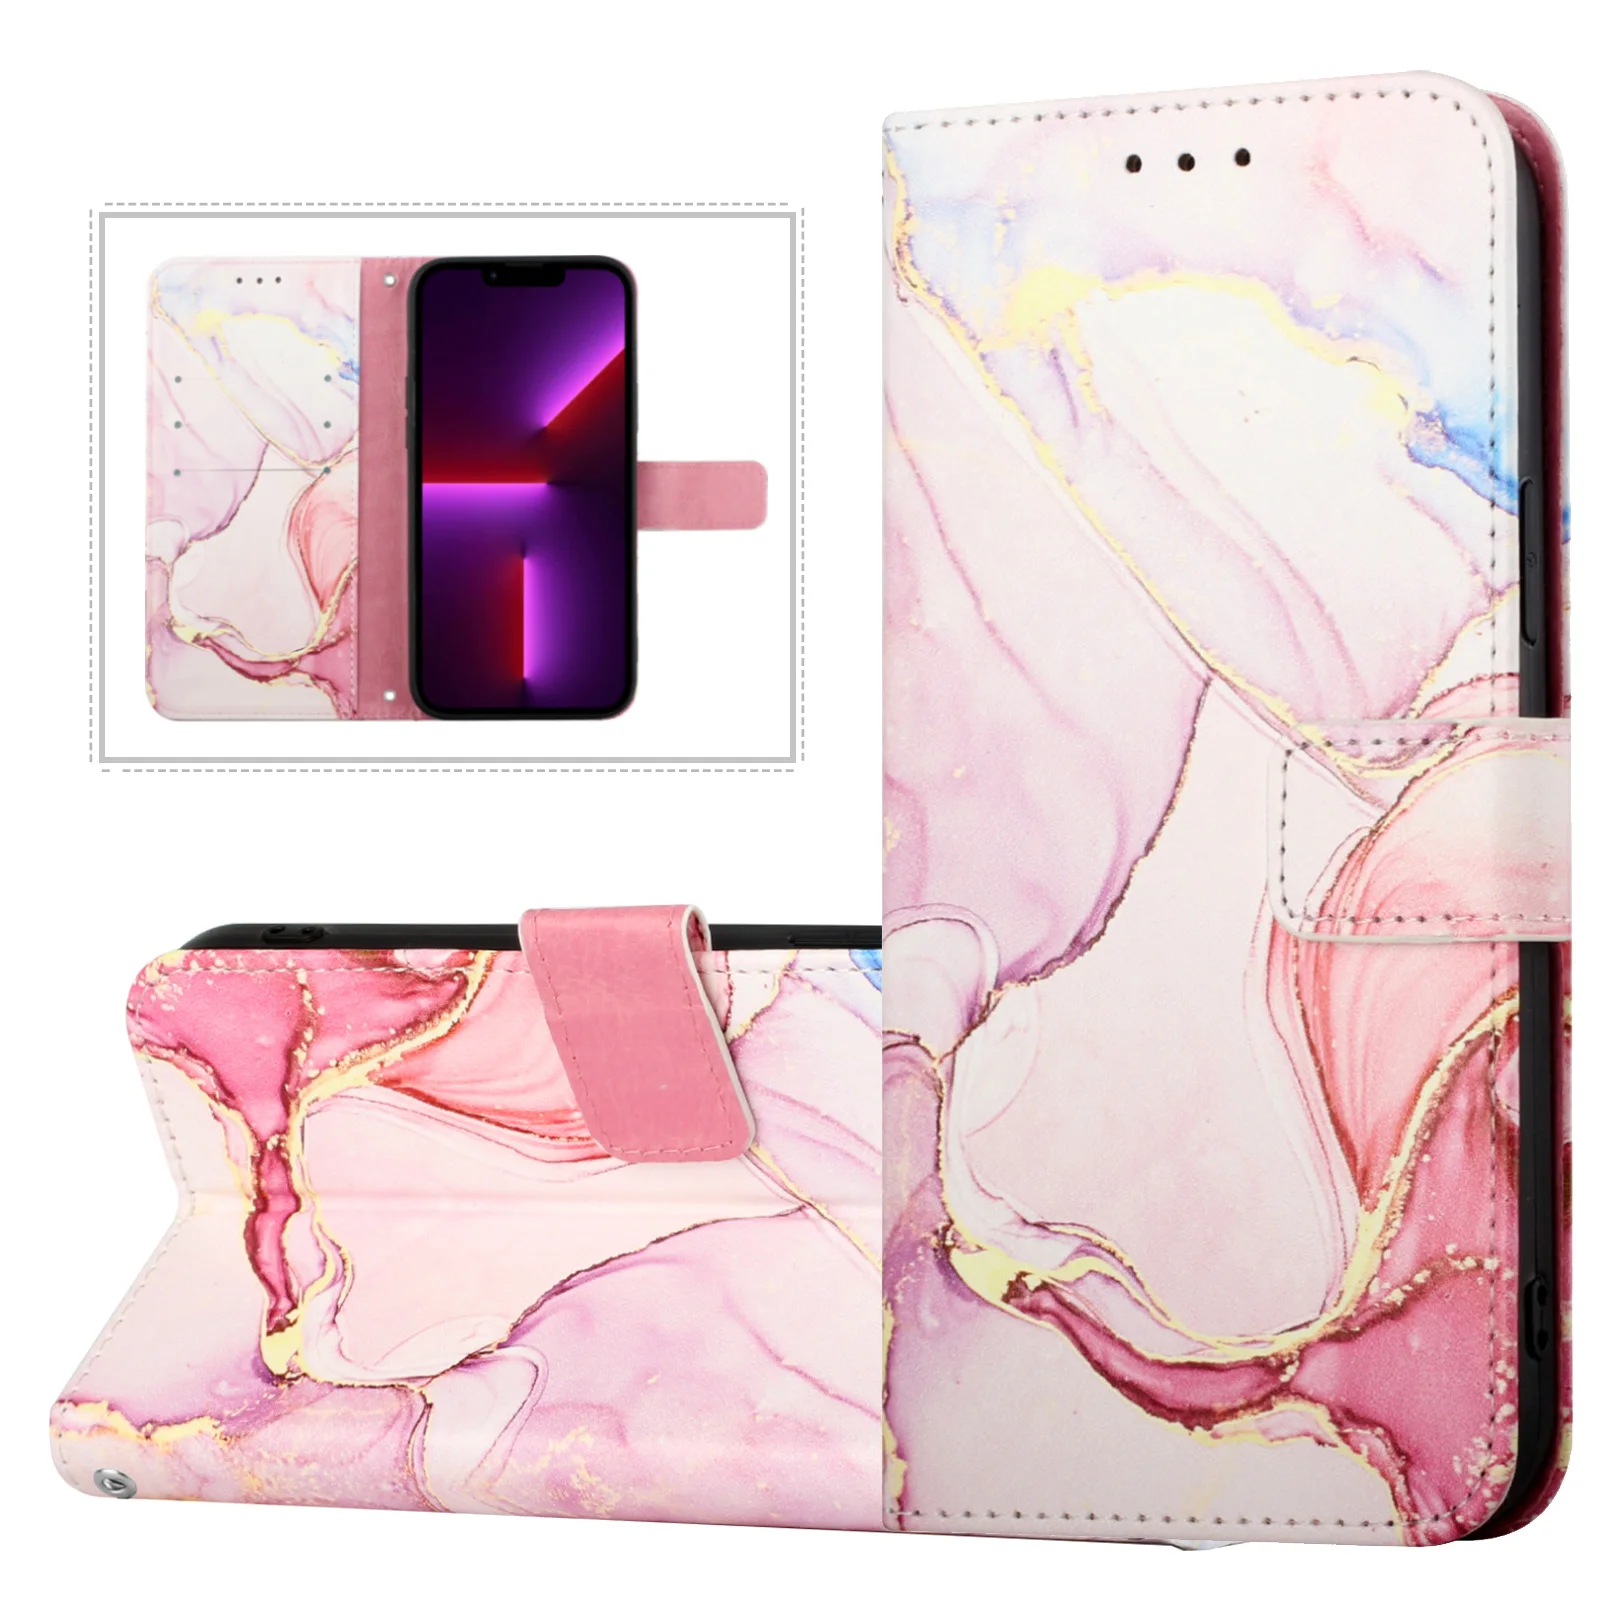 

Phone Covers For etui Apple iPhone X Carcaso Colorful Cep Telefonu Wallet Case Kryty sFor Apple iPhone hoesje XS Book Phone Bag